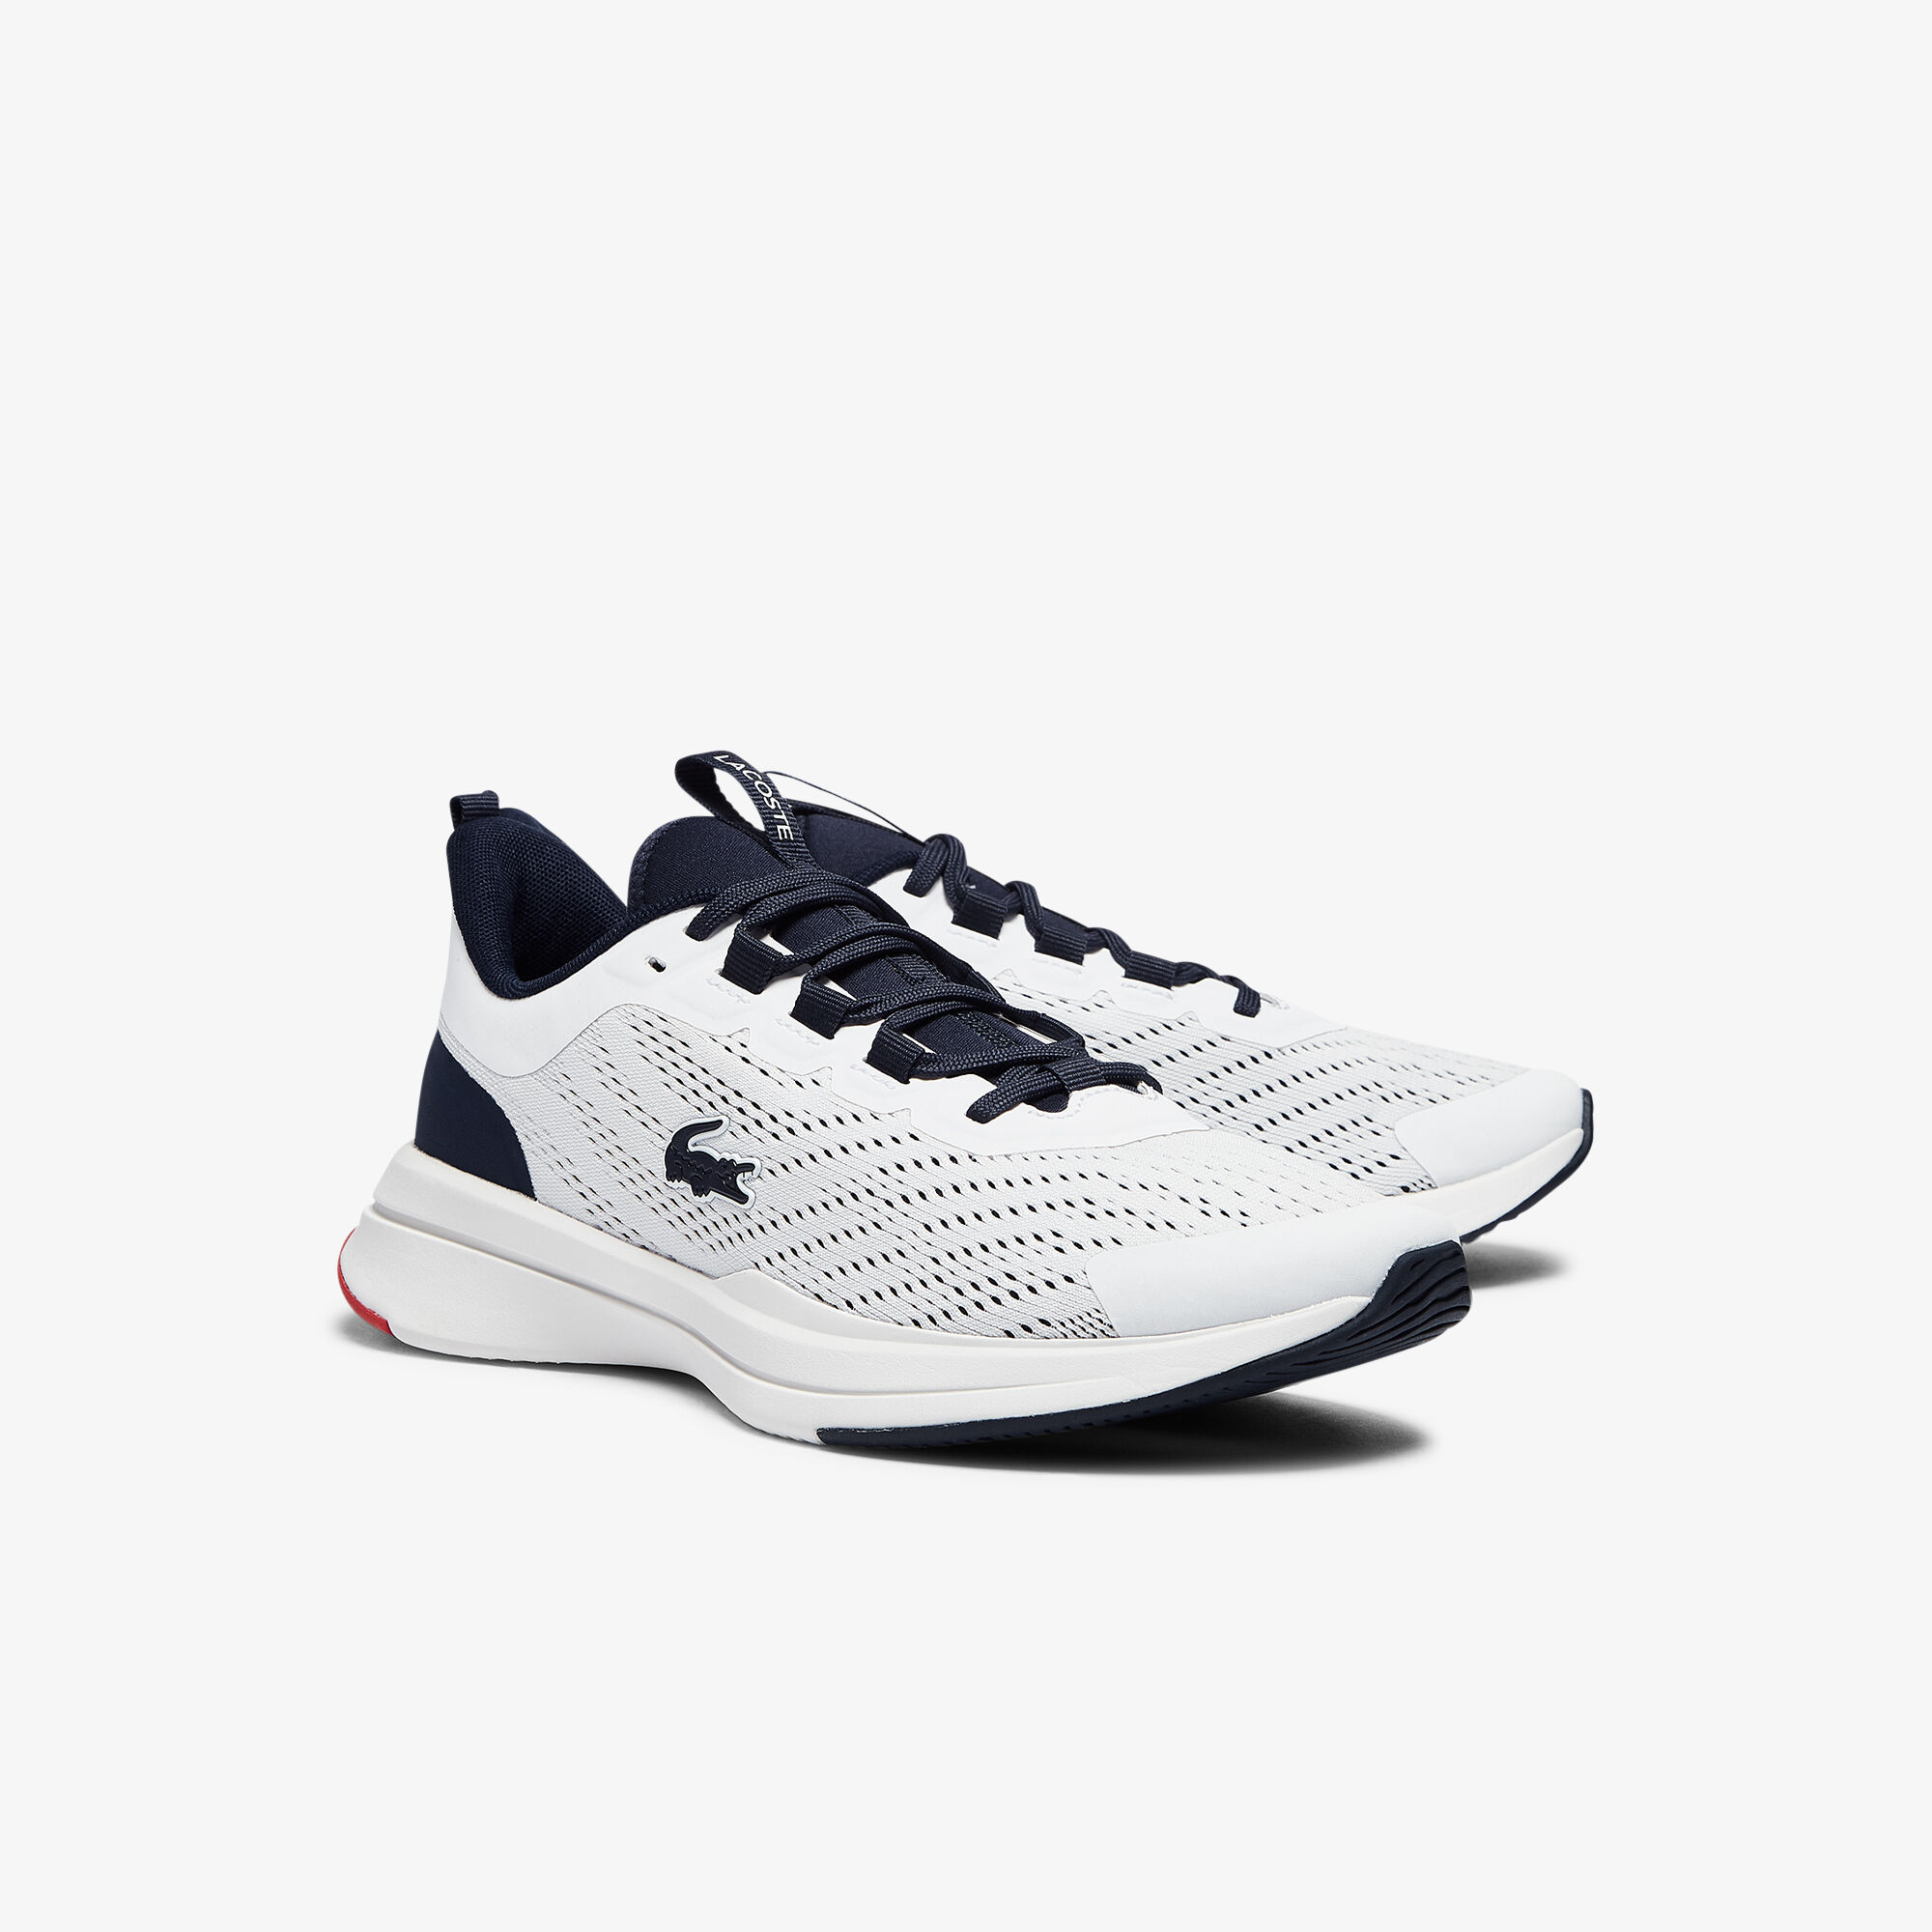 Women's Run Spin Textile Trainers